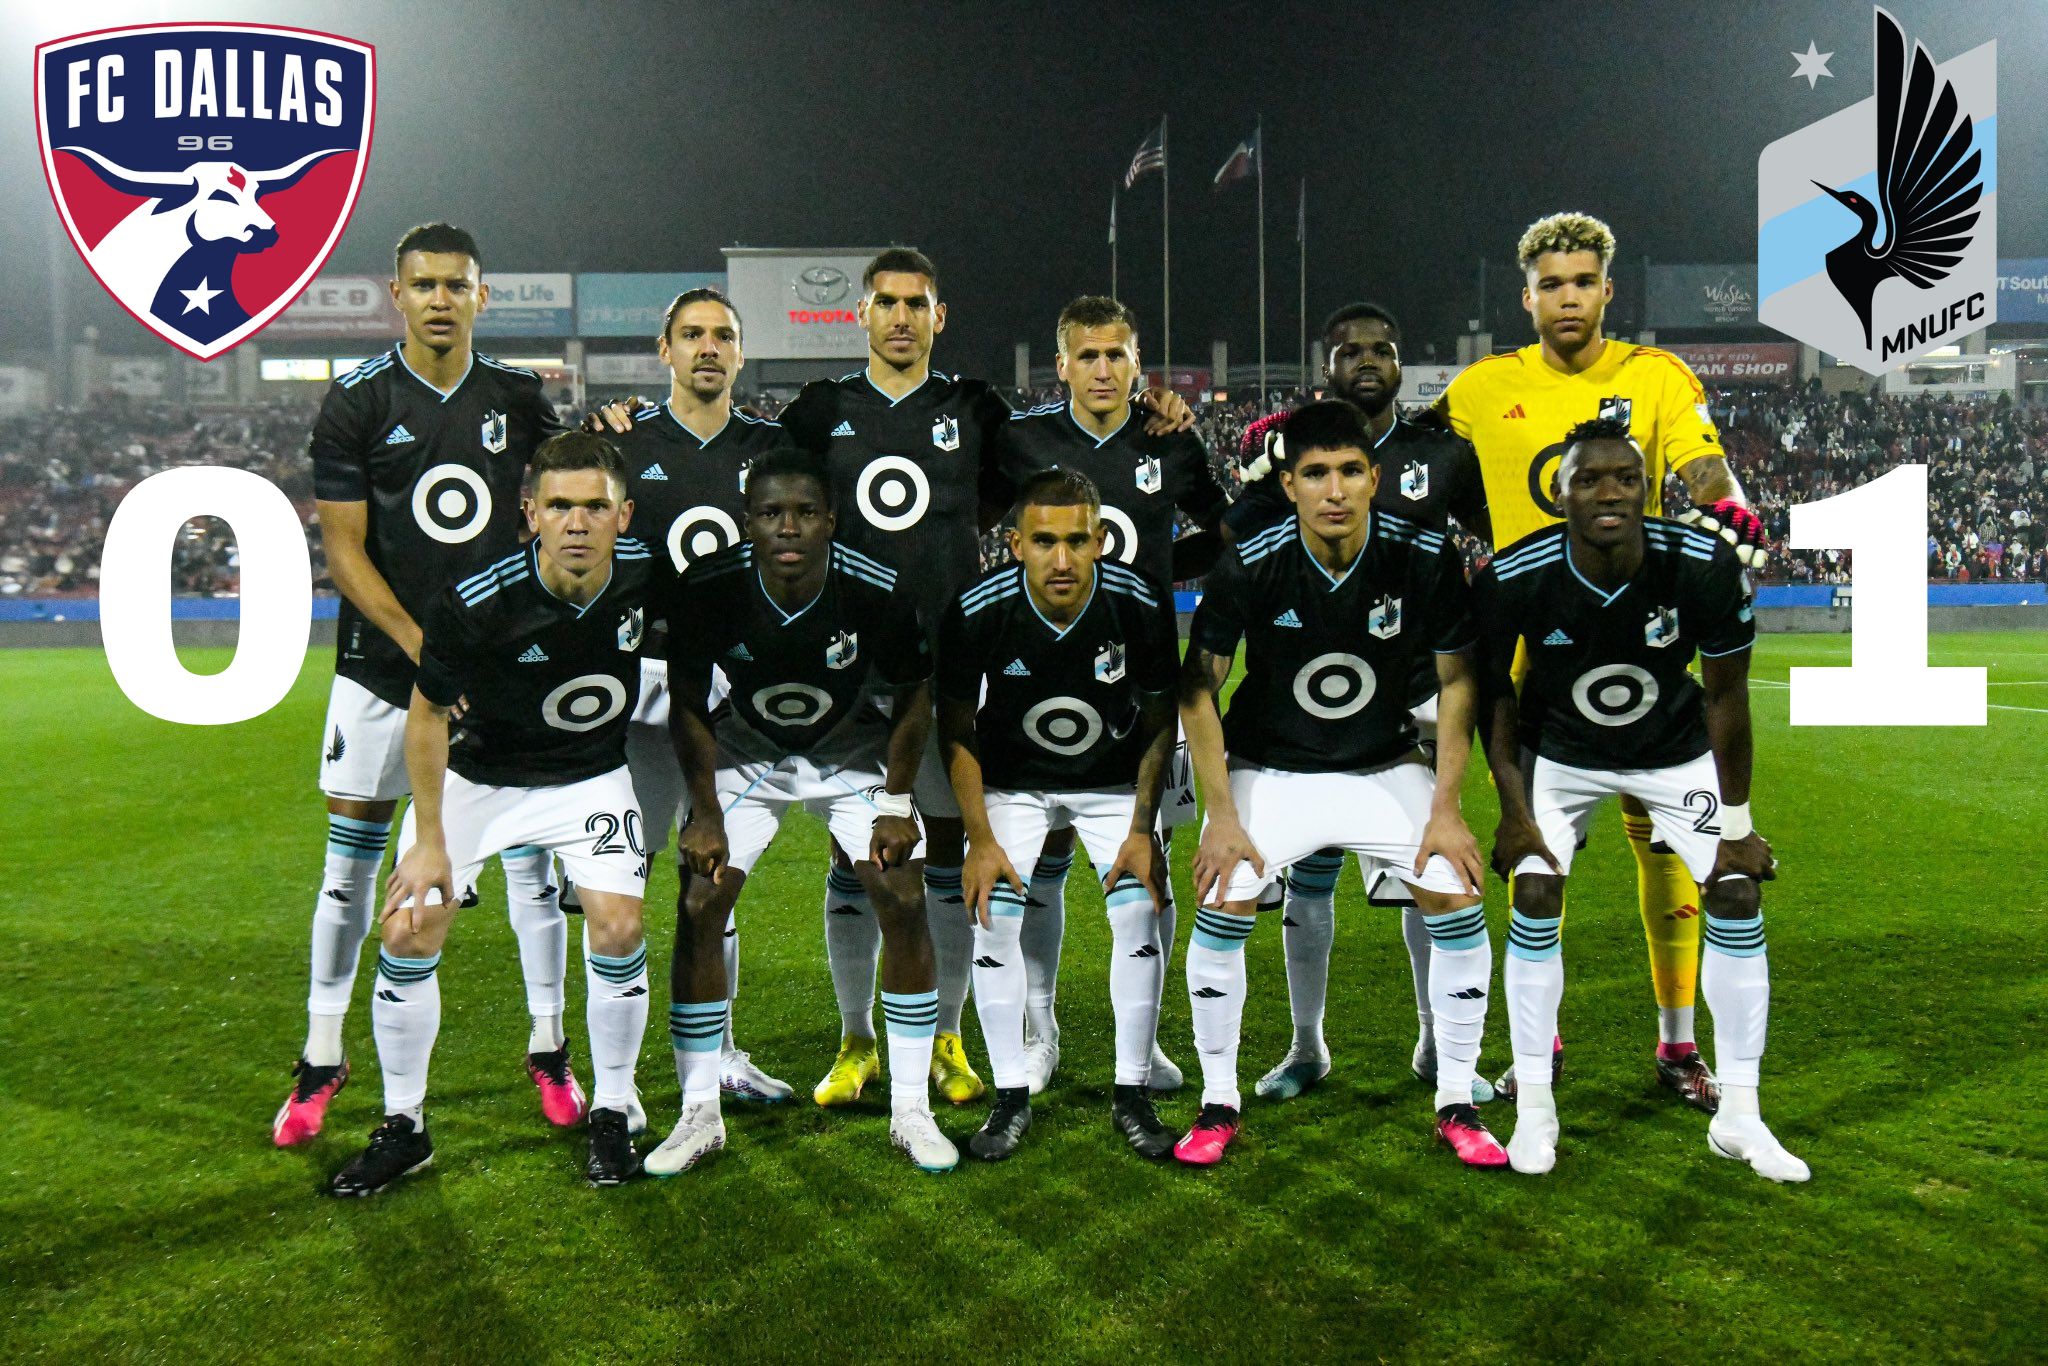 MNUFC's starters line up for a photo before kickoff. Back row from left: Arriaga, Valentin, Boxall, Lod, Lawrence, St. Clair. Front: Trapp, Hlongwane, Fragapane, Tapias, Garcia.